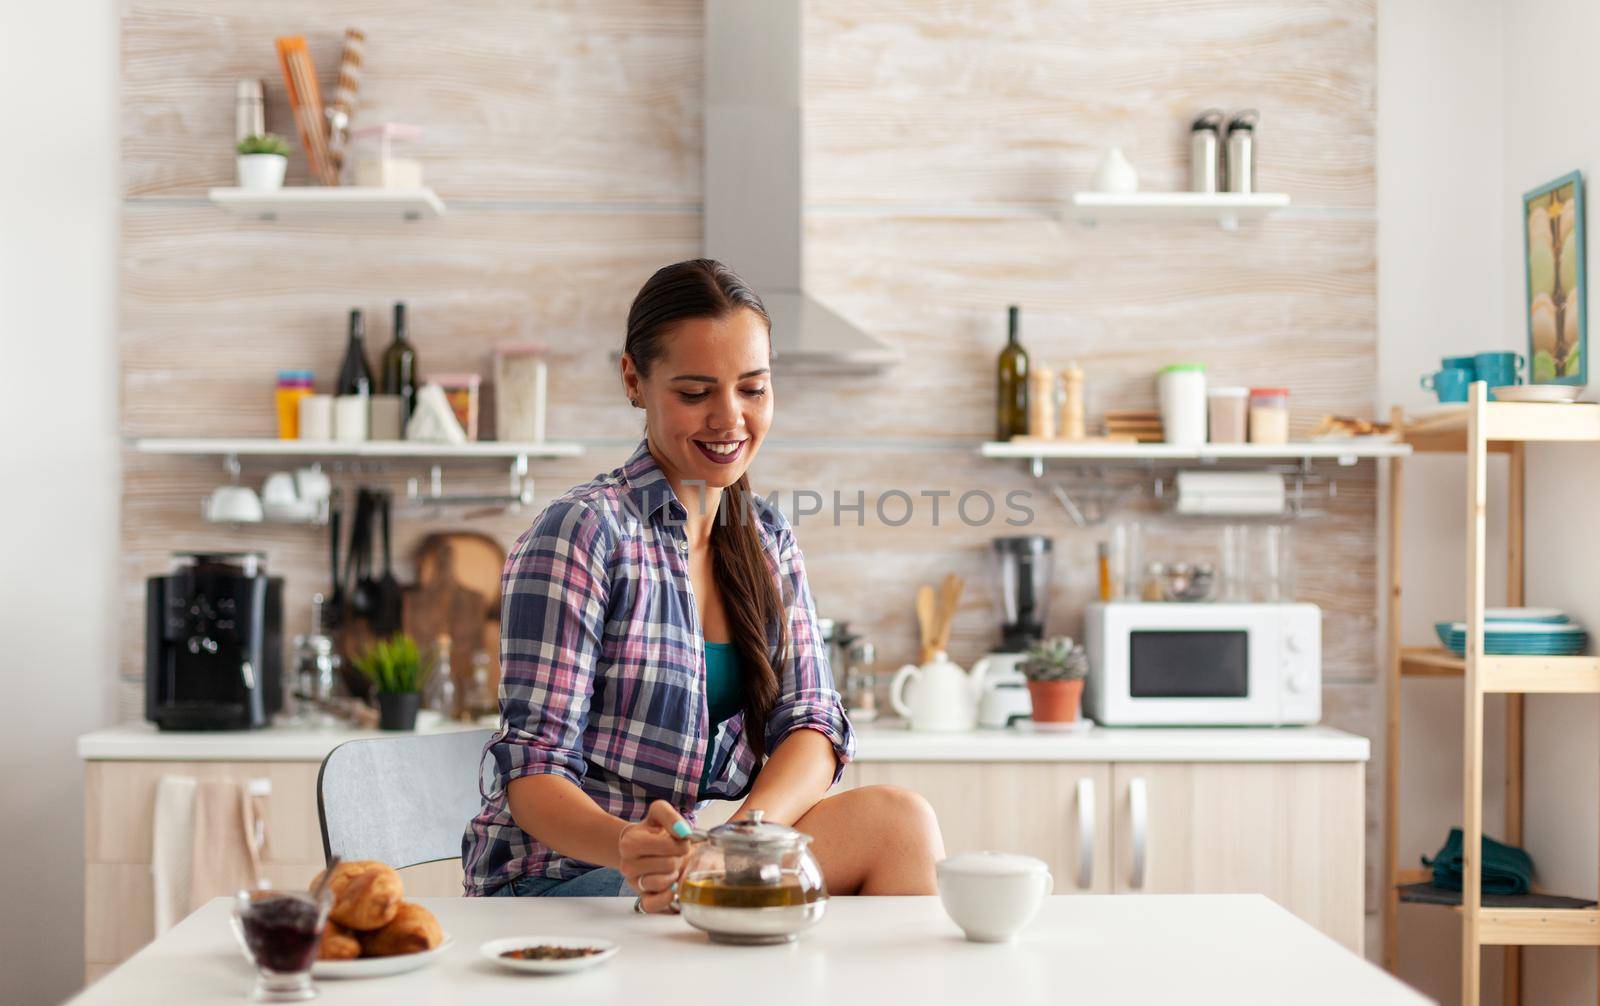 Young lady drinking green tea and smiling at breakfast sitting at the table in the kitchen. Woman, lifestylem, beverage, preparation, herbal, teapot, morning, aromatic.